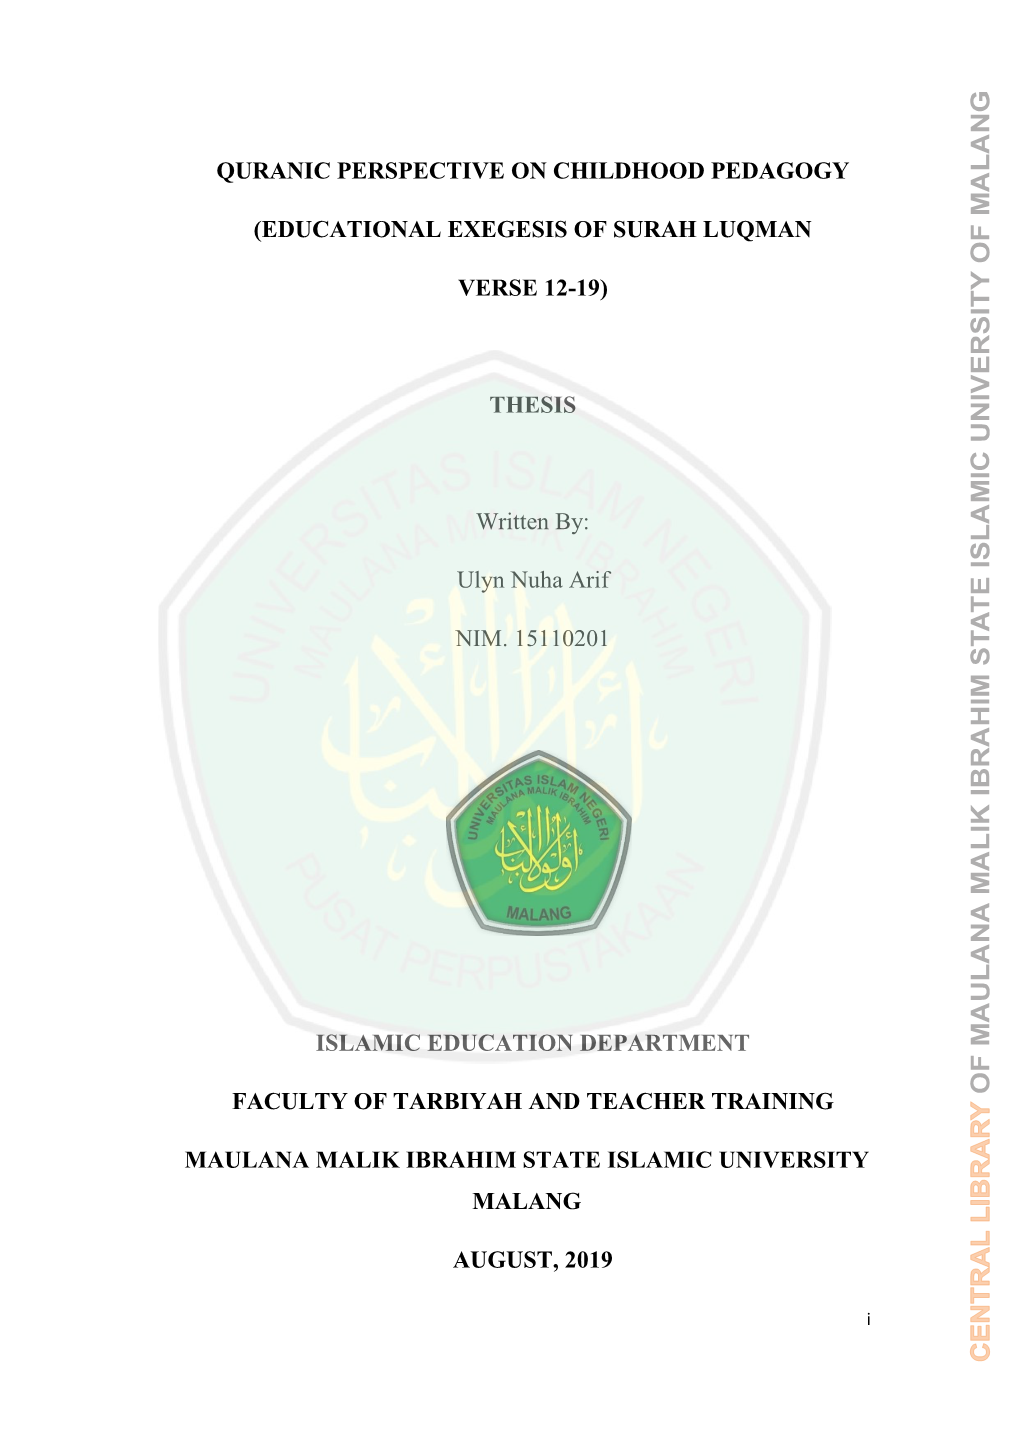 Educational Exegesis of Surah Luqman Verse 12-19)" to Fulfill Some Requirements to Obtain a Bachelor of Islamic Education (S